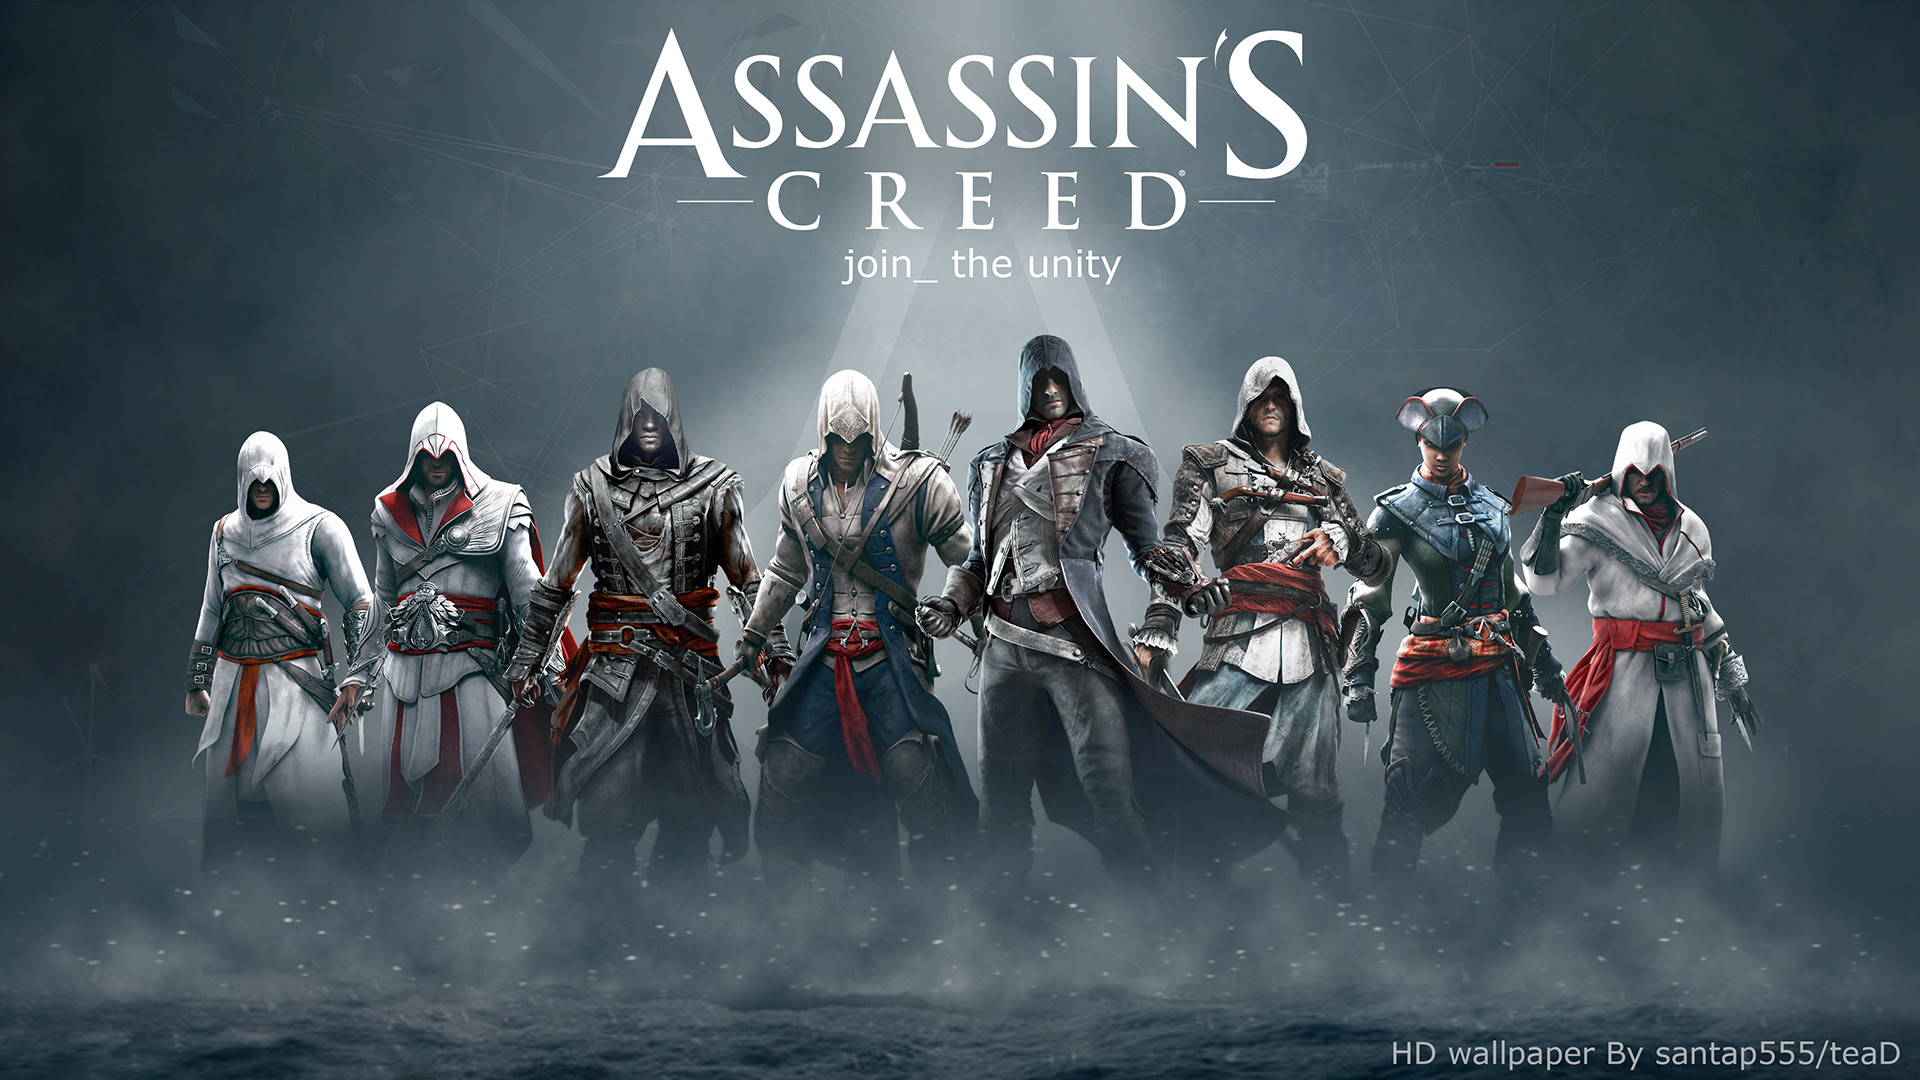 1920x1080 ... Assassin's Creed HD wallpaper by teaD by santap555